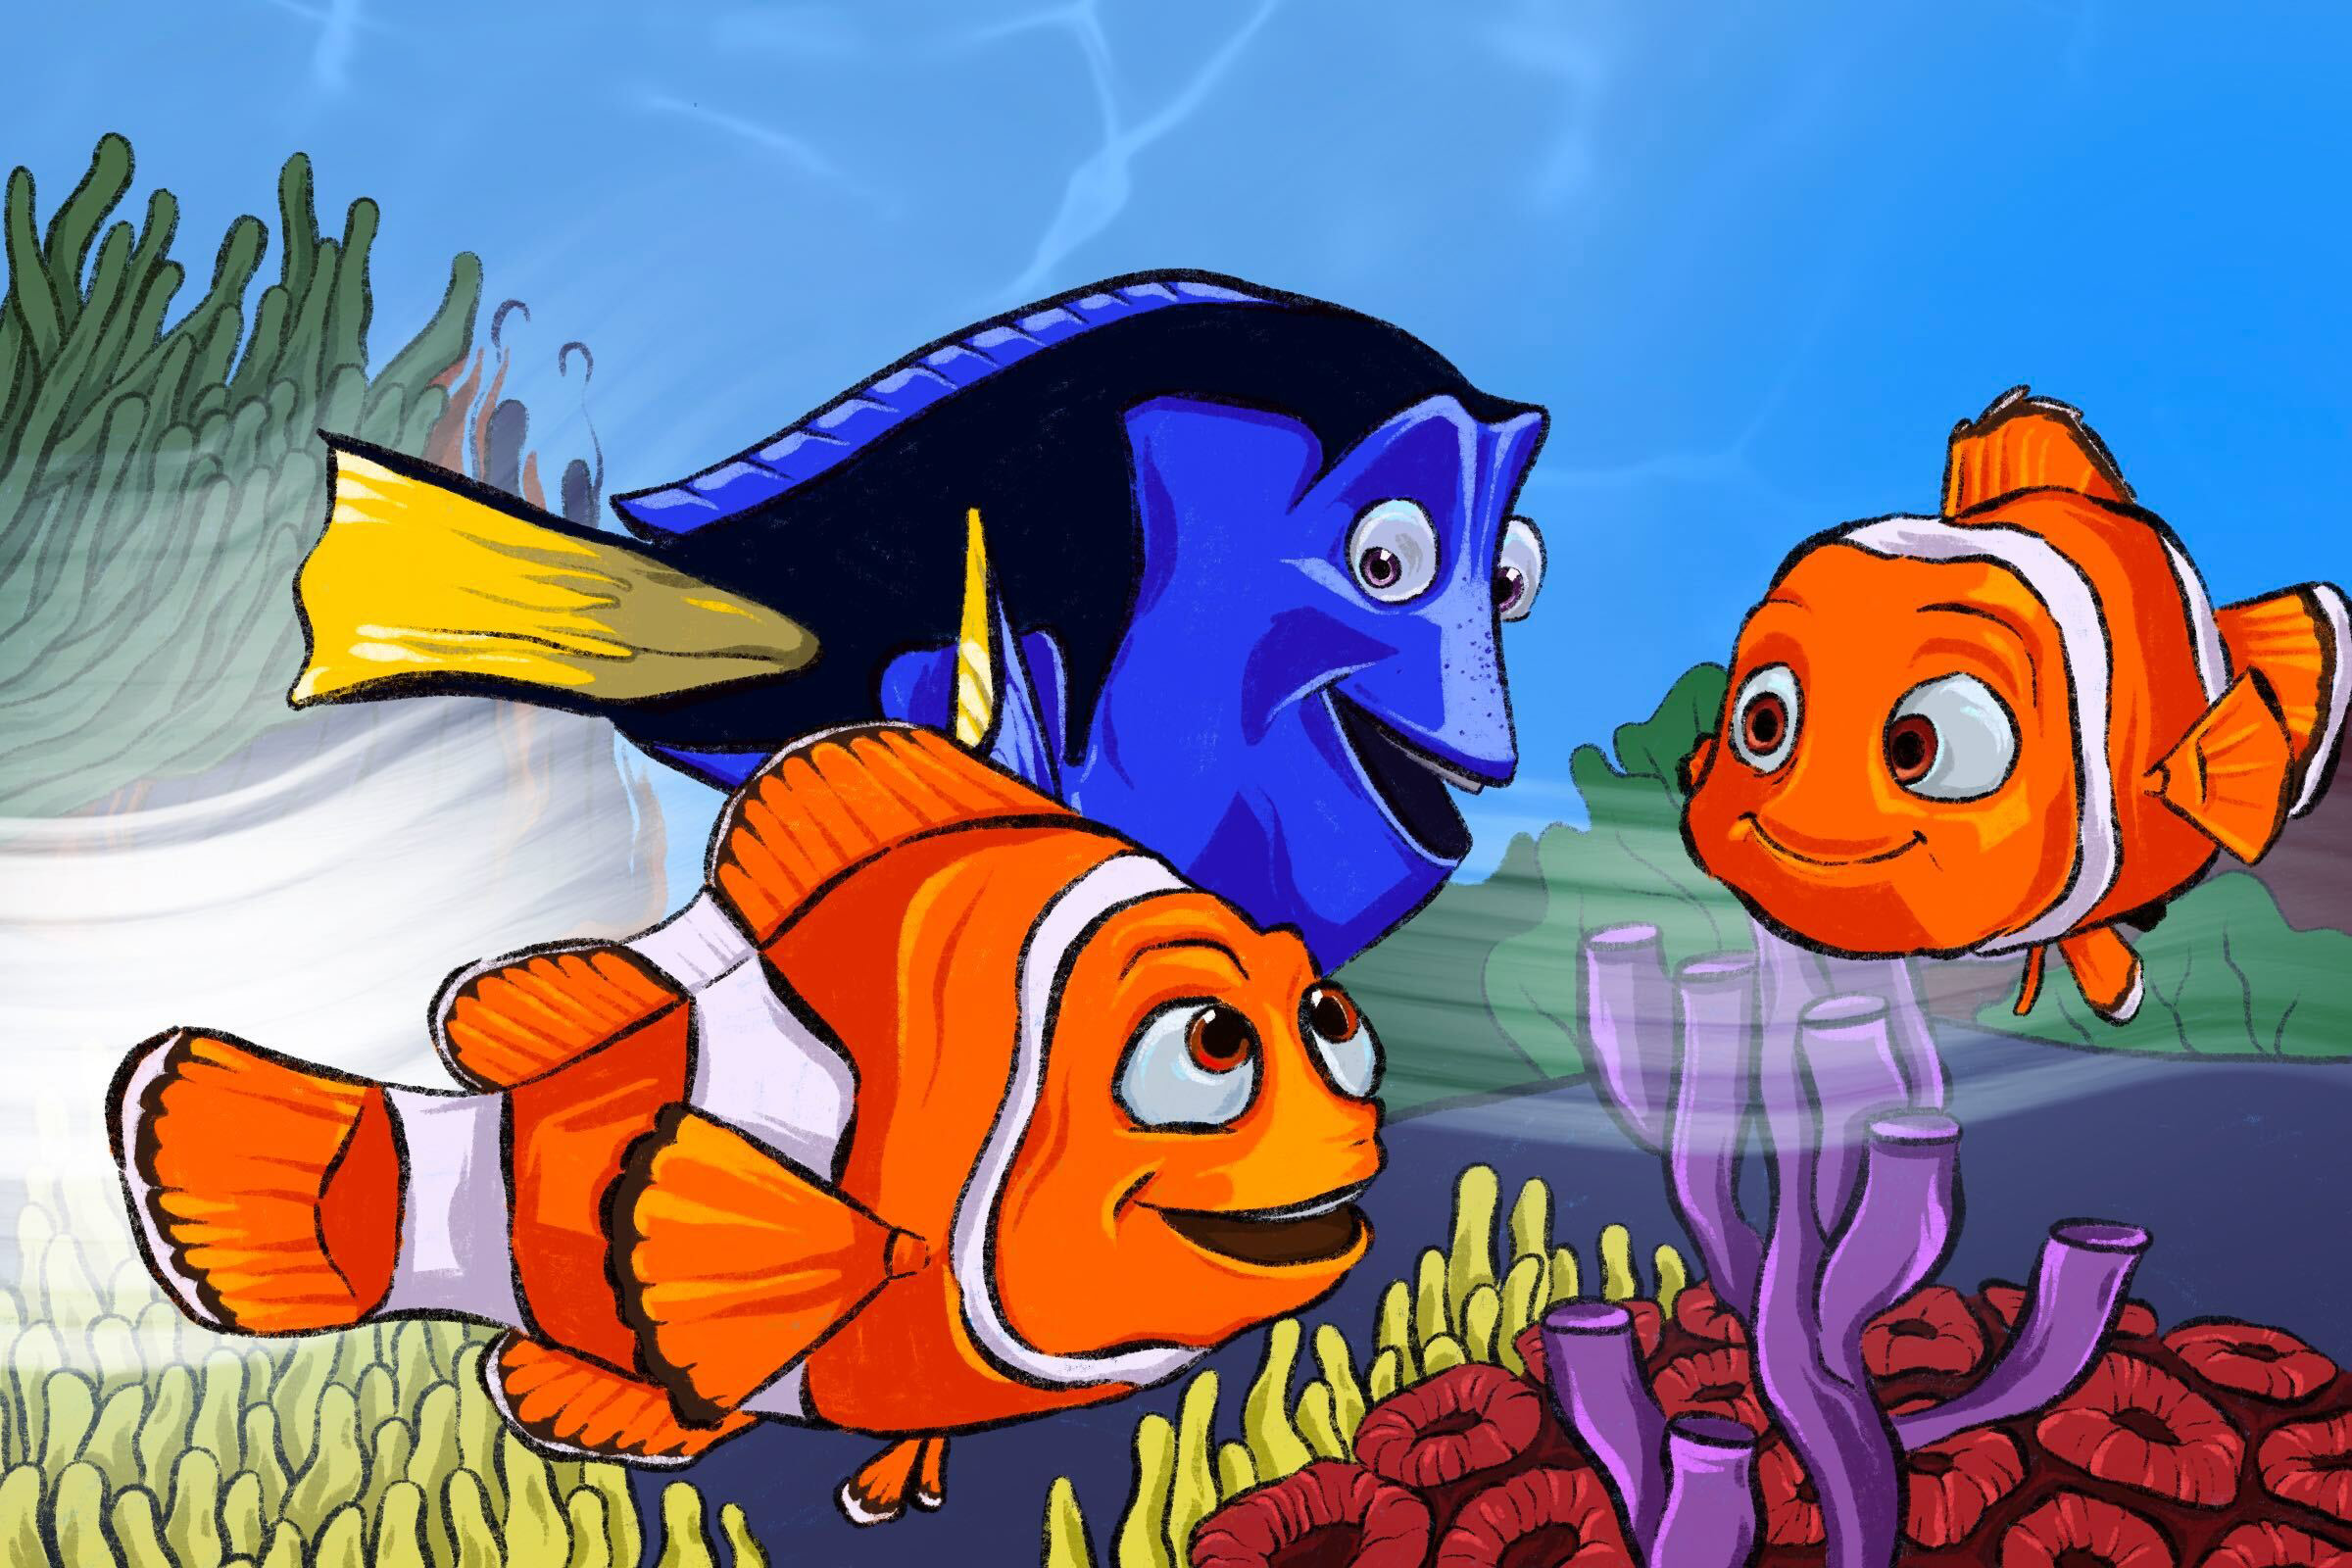 Firsts and family, as told by 'Finding Nemo